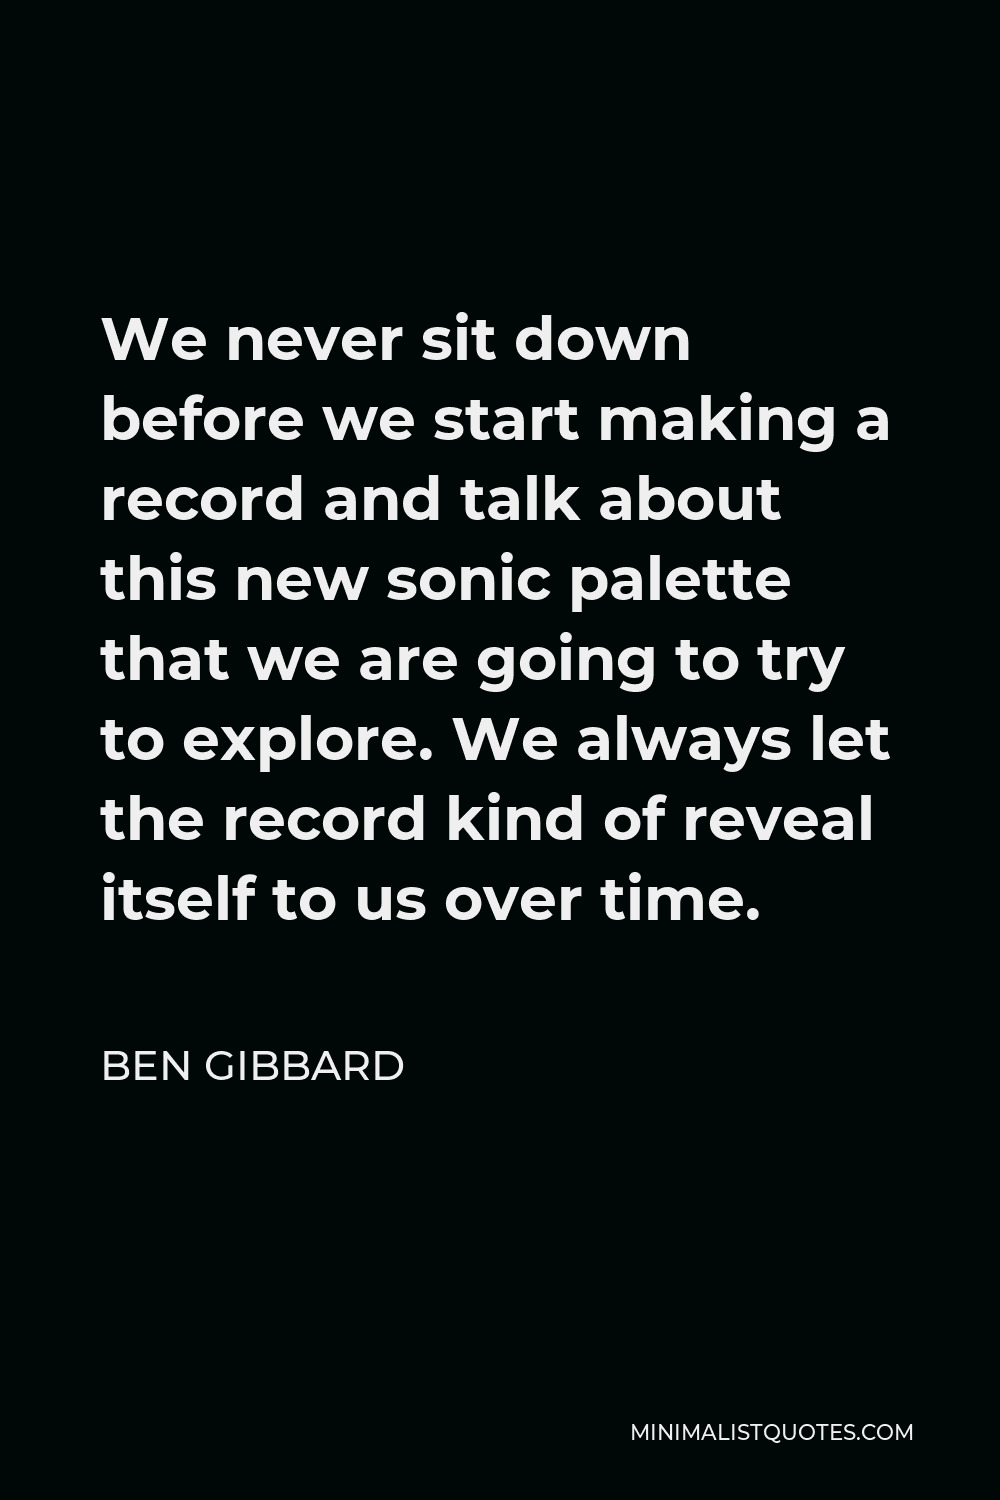 Ben Gibbard Quote - We never sit down before we start making a record and talk about this new sonic palette that we are going to try to explore. We always let the record kind of reveal itself to us over time.